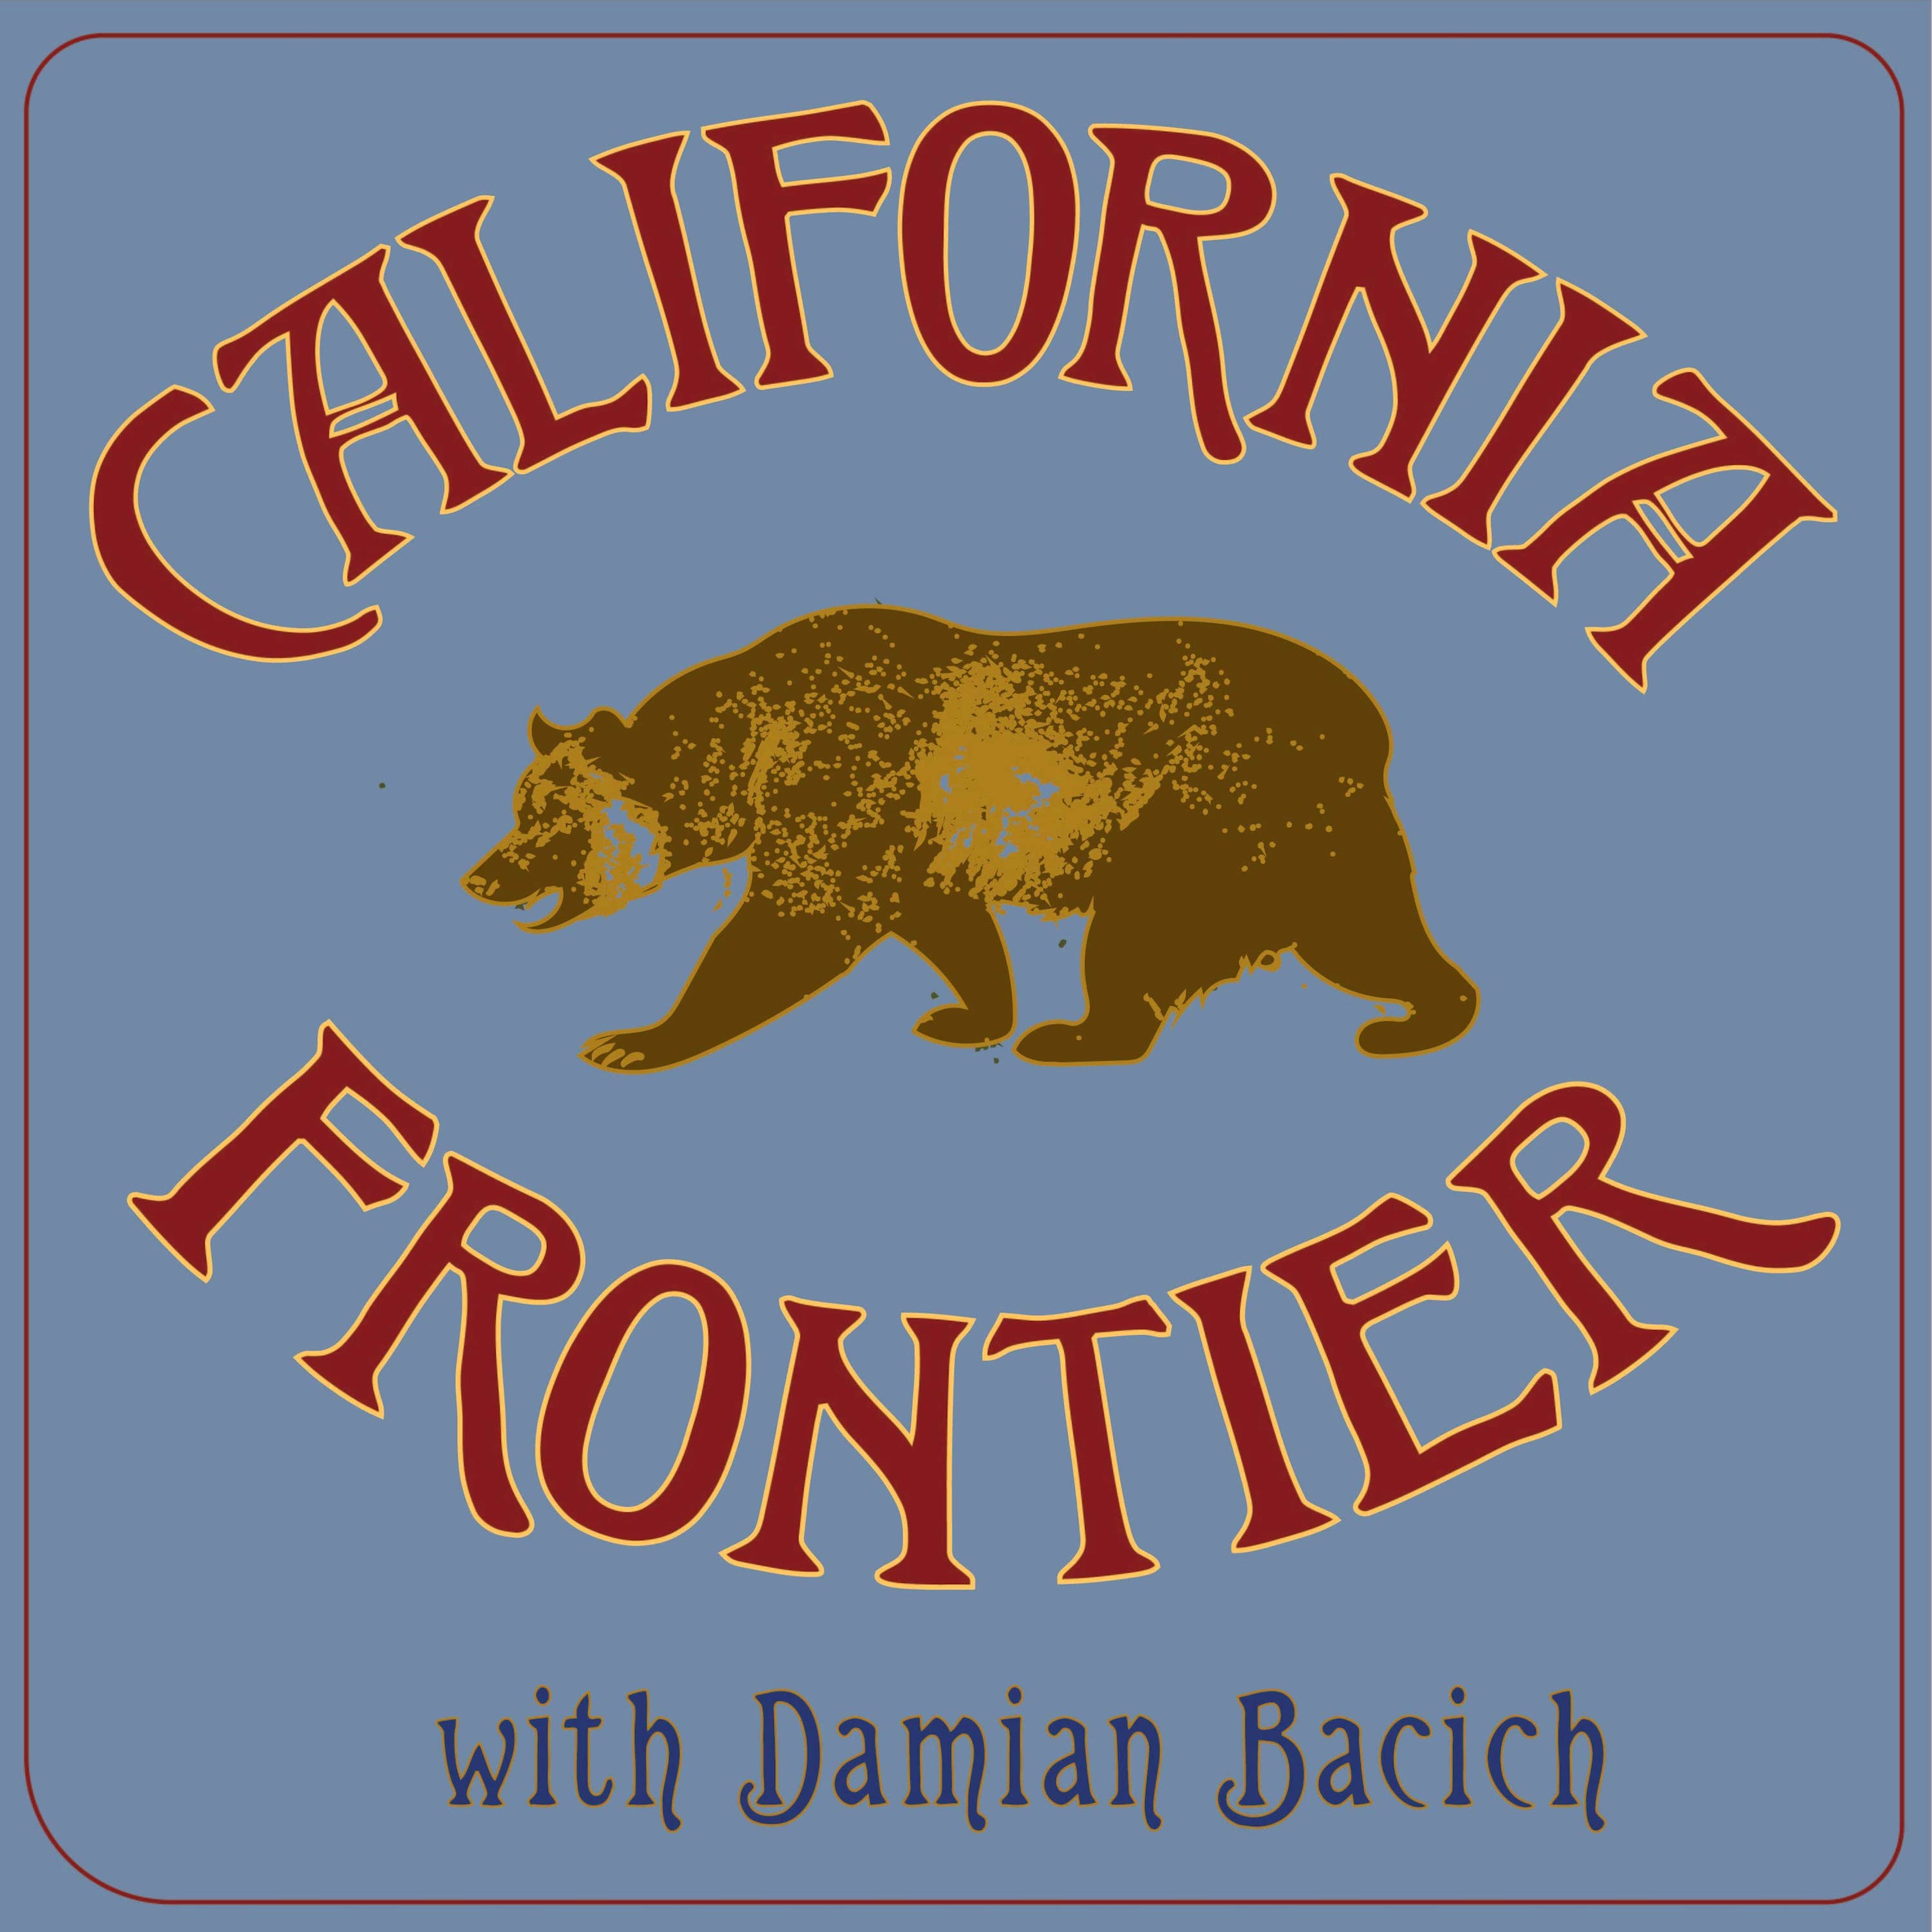 The California Frontier Project